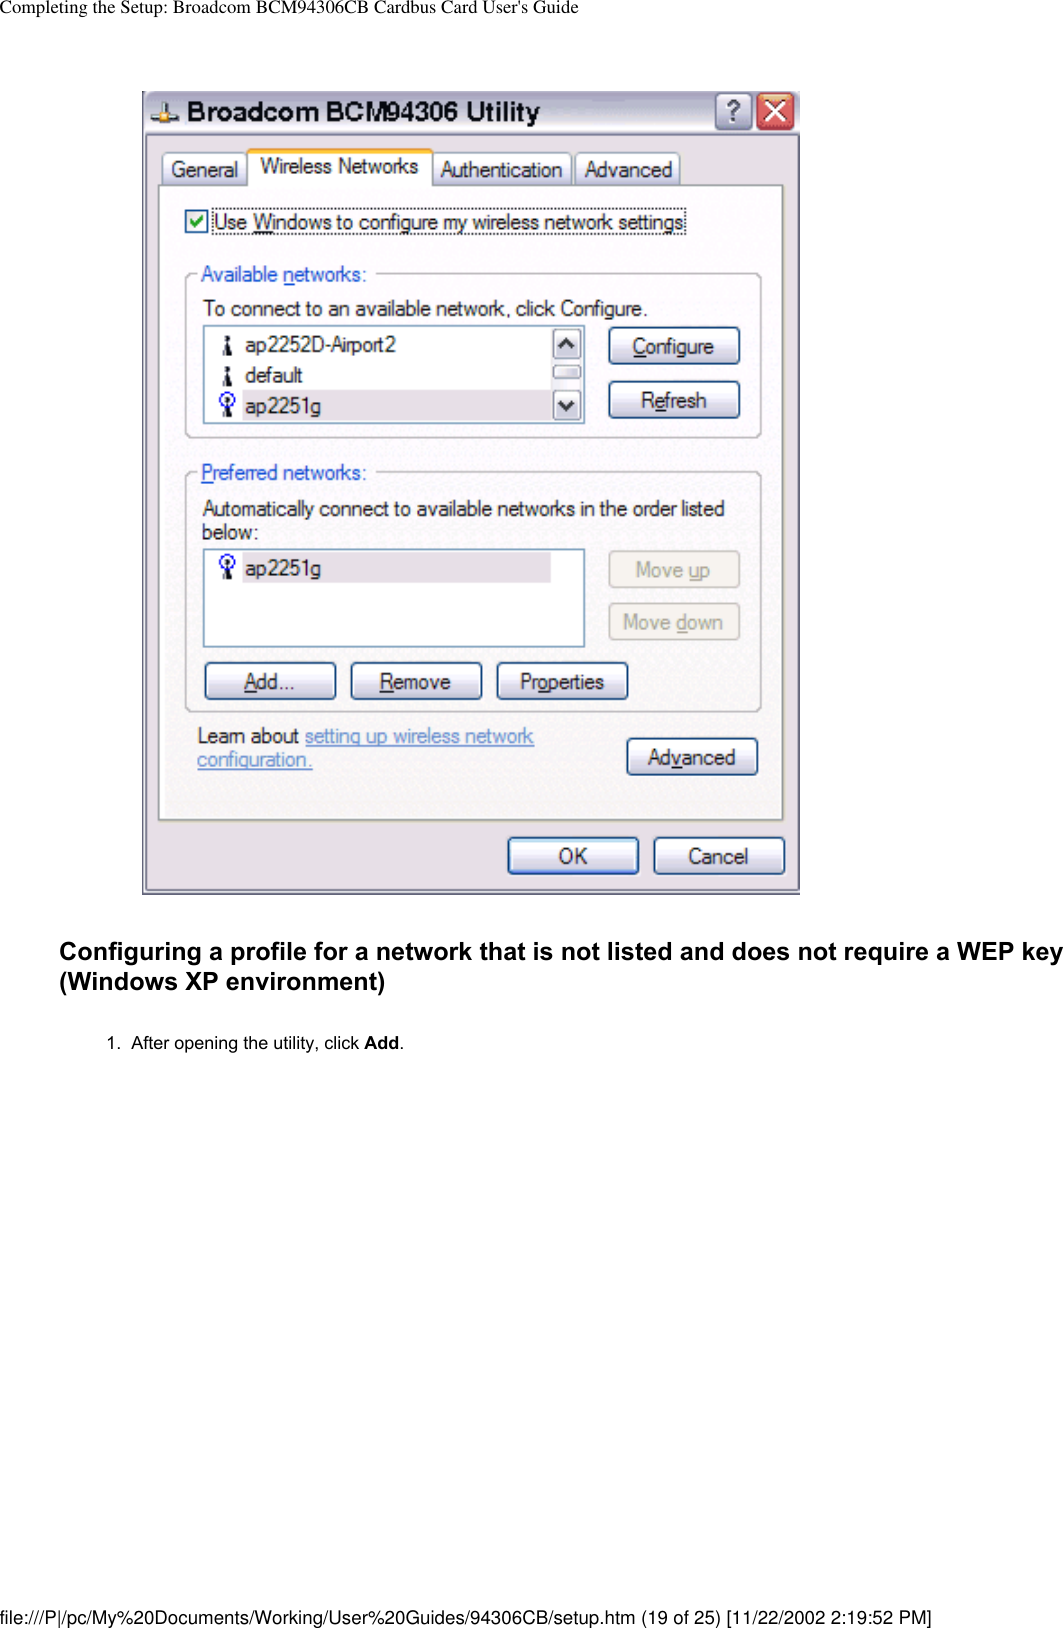 Completing the Setup: Broadcom BCM94306CB Cardbus Card User&apos;s GuideConfiguring a profile for a network that is not listed and does not require a WEP key (Windows XP environment)1.  After opening the utility, click Add. file:///P|/pc/My%20Documents/Working/User%20Guides/94306CB/setup.htm (19 of 25) [11/22/2002 2:19:52 PM]